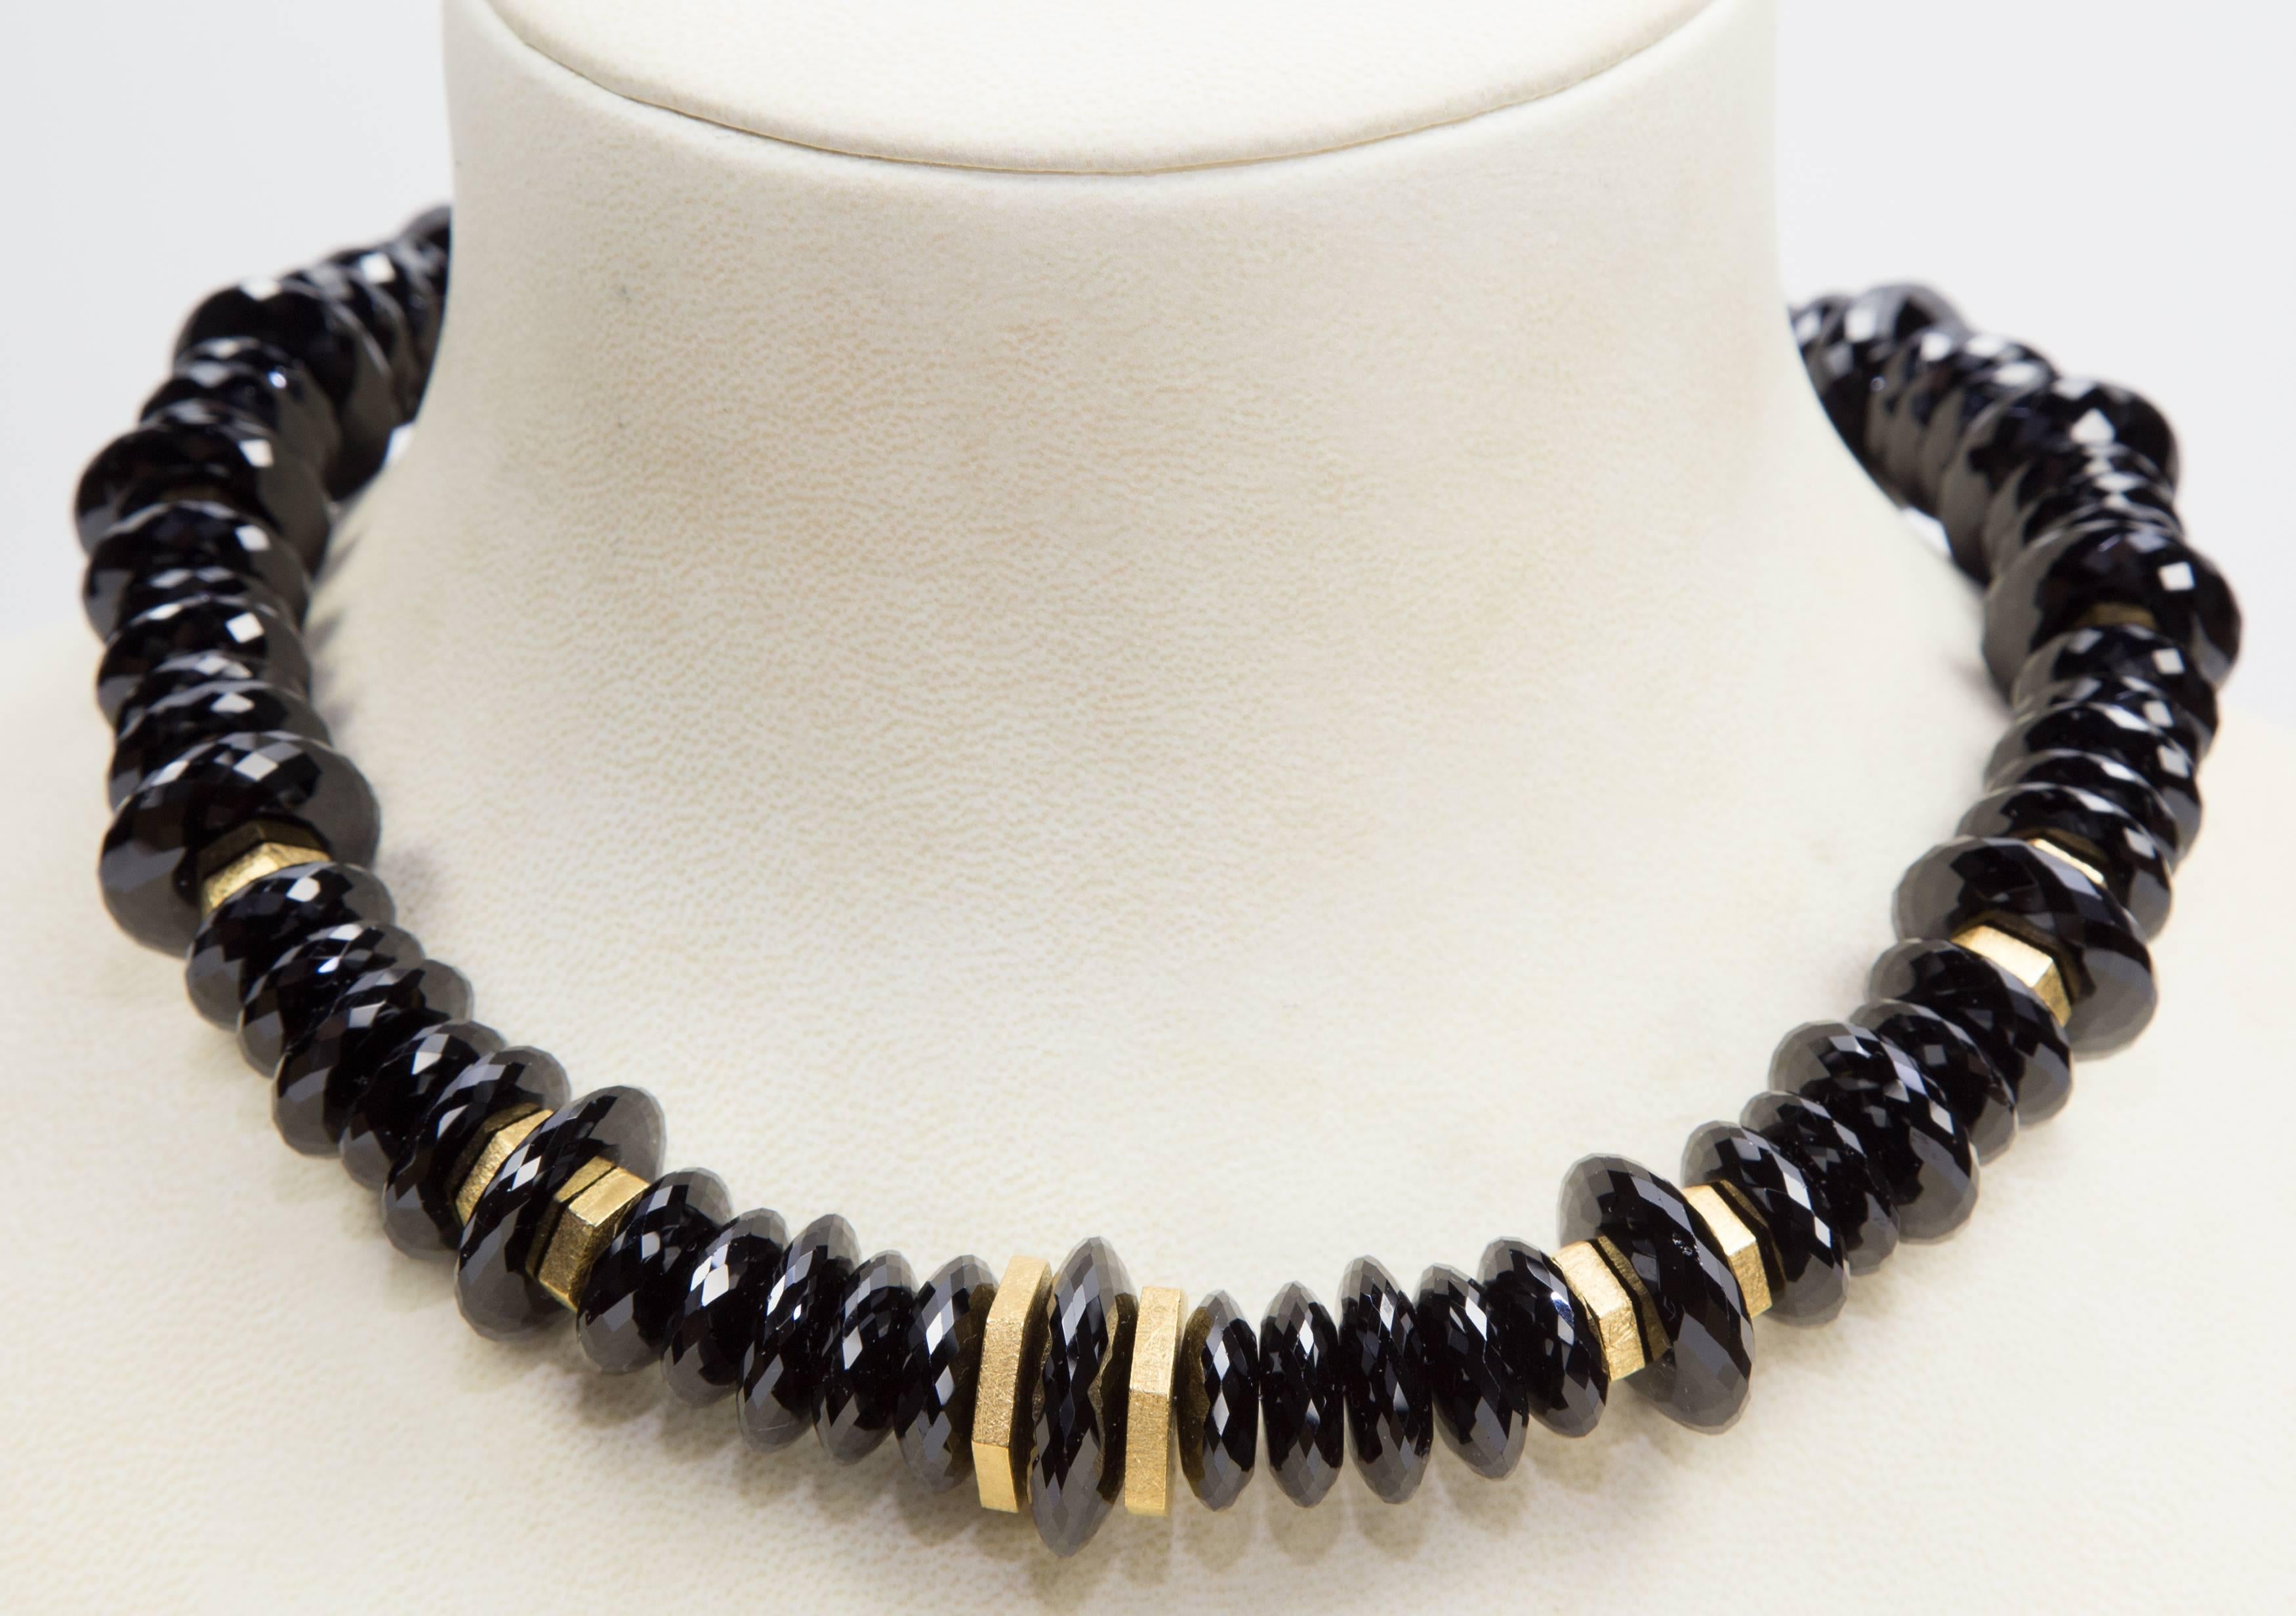 Shimmering High Quality facet cut Black Spinel rondelle beads interspersed with Gold plated Sterling Silver discs and a unique Gilded Sterling Silver clasp give this simple Stunning necklace Dramatic Flair. Spectacular in its simplicity! A perfect